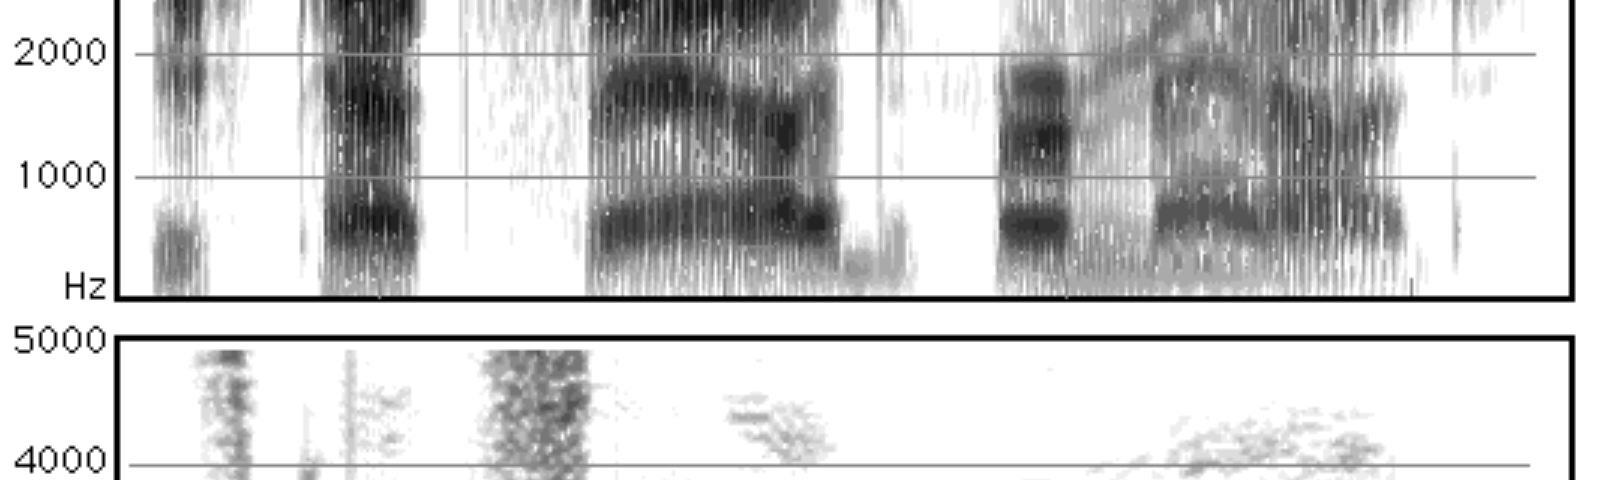 A comparison of wide and narrow spectrograms showing that formant information is more prominent in wide spectrograms.